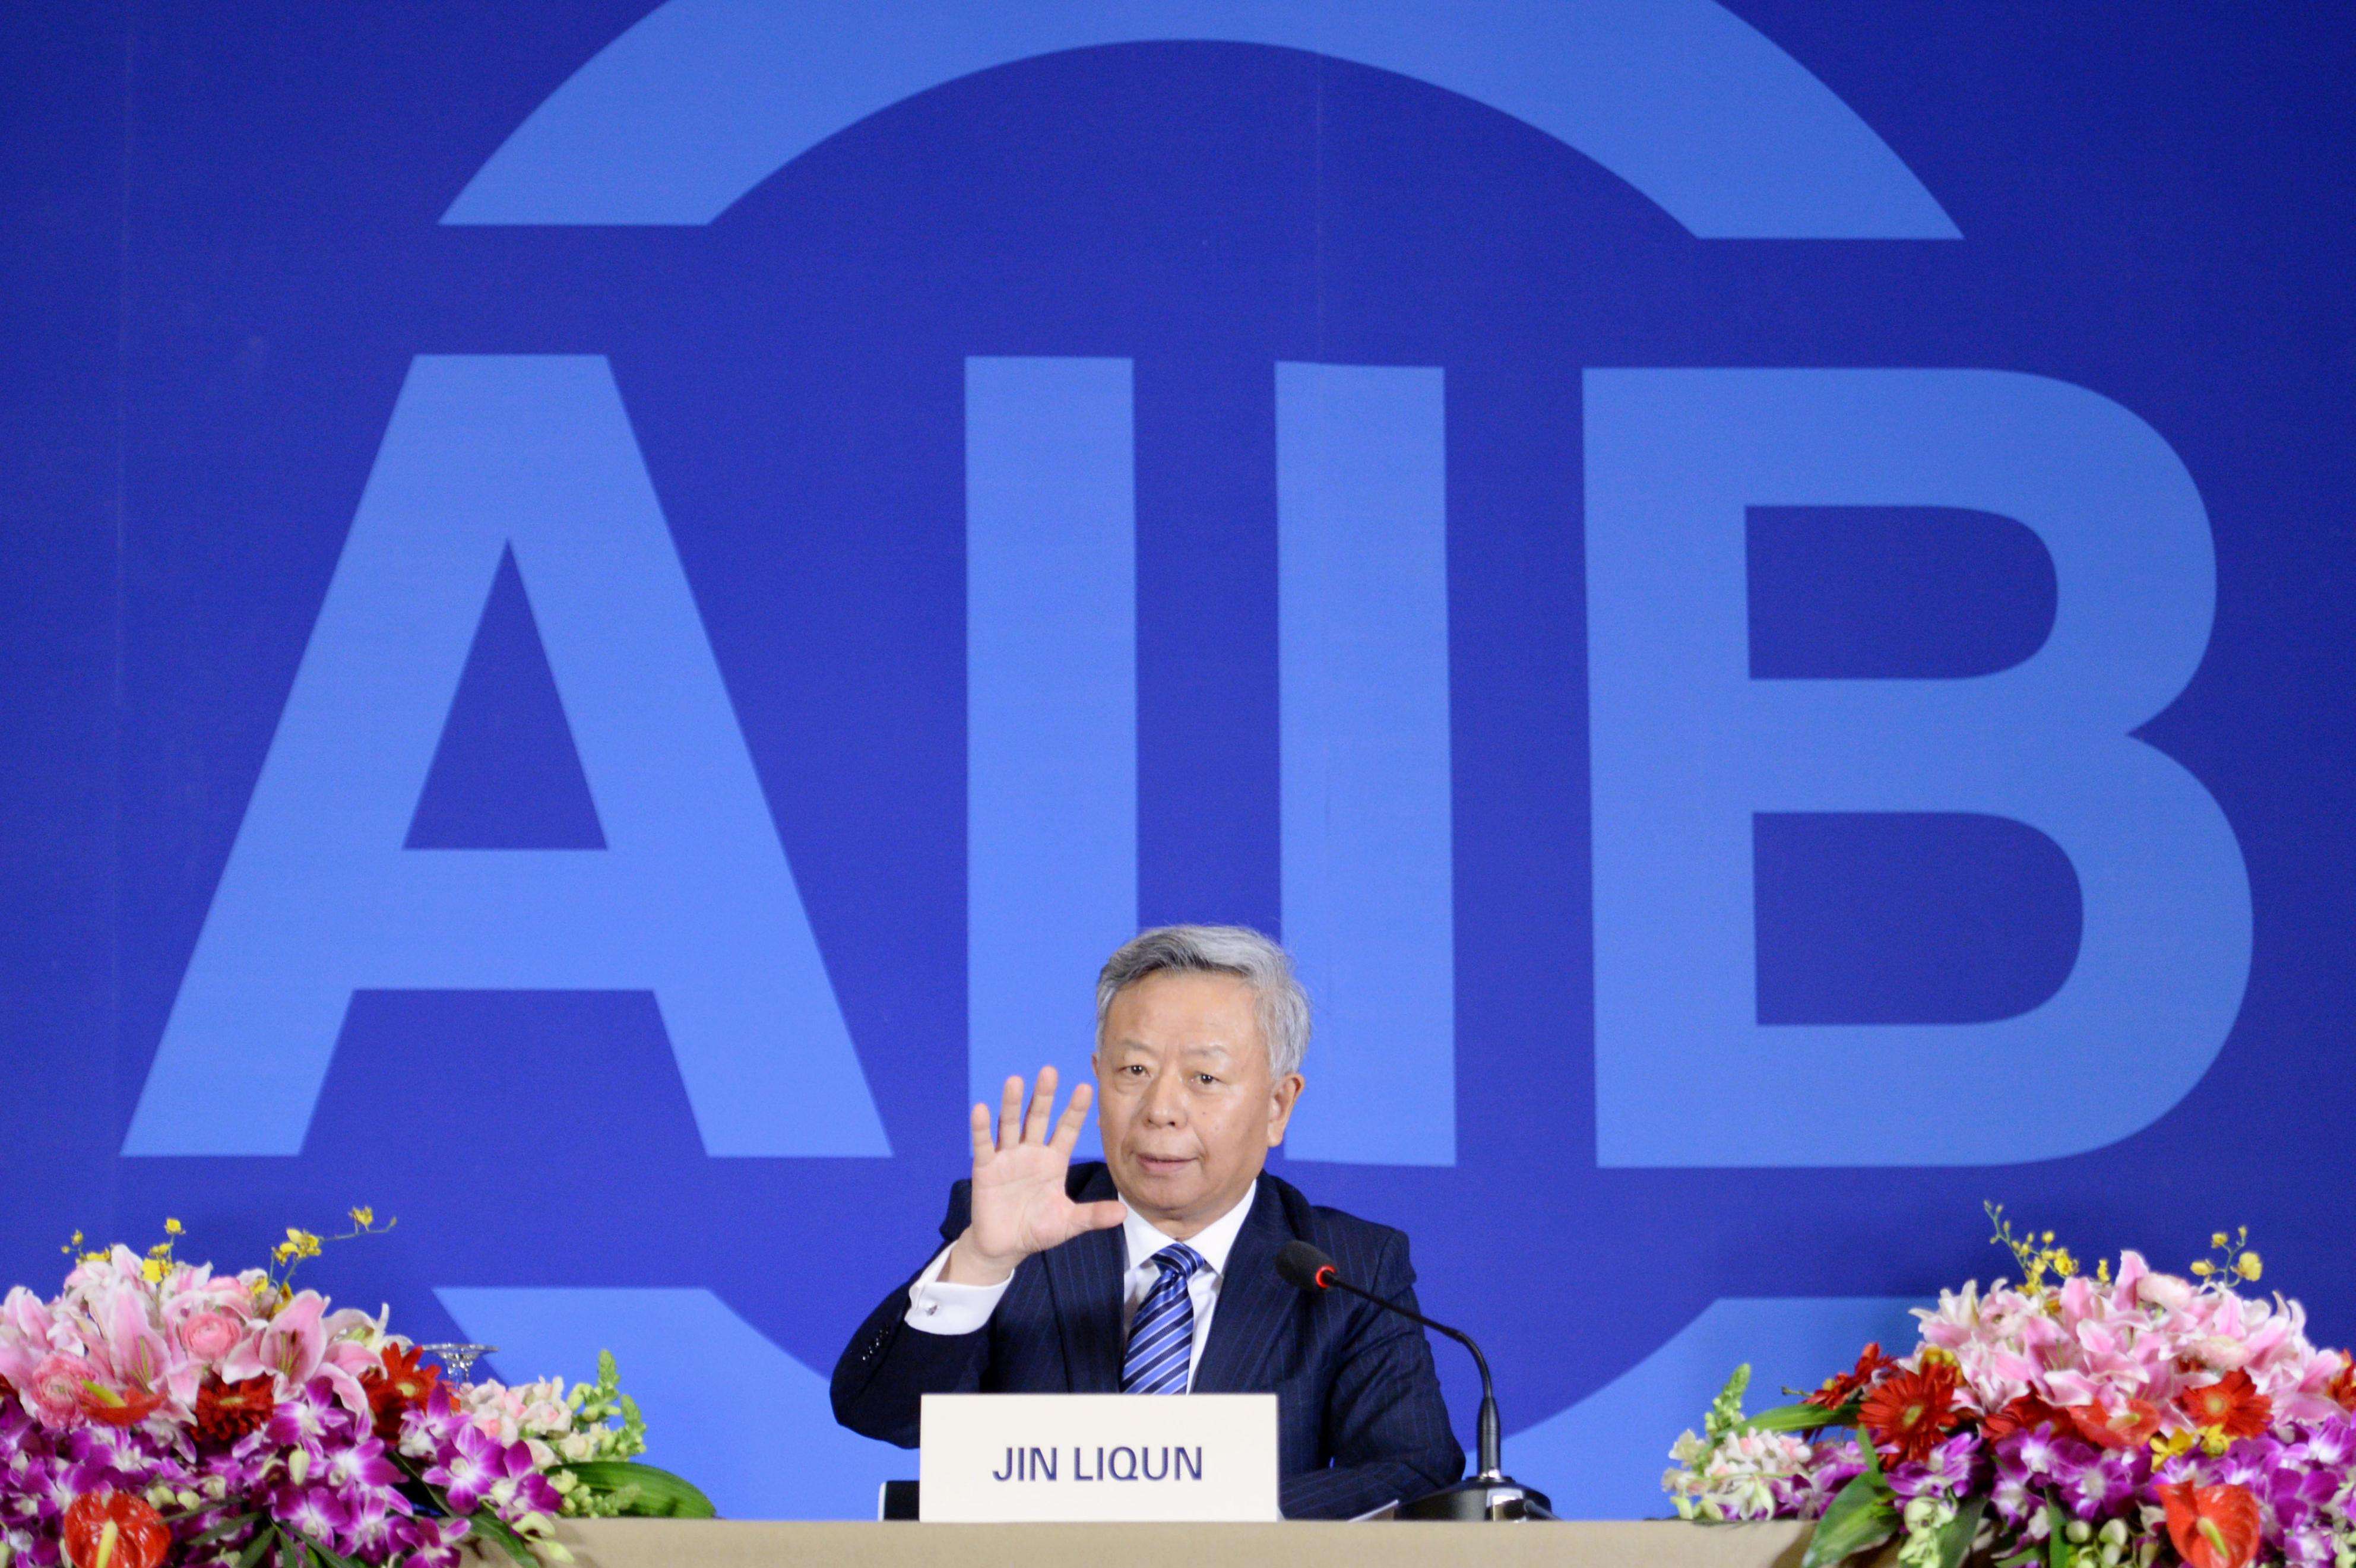 Jin Liqun, the inaugural president of the Asian Infrastructure Investment Bank, speaks at a news conference in Beijing on January 17. Photo: Kyodo